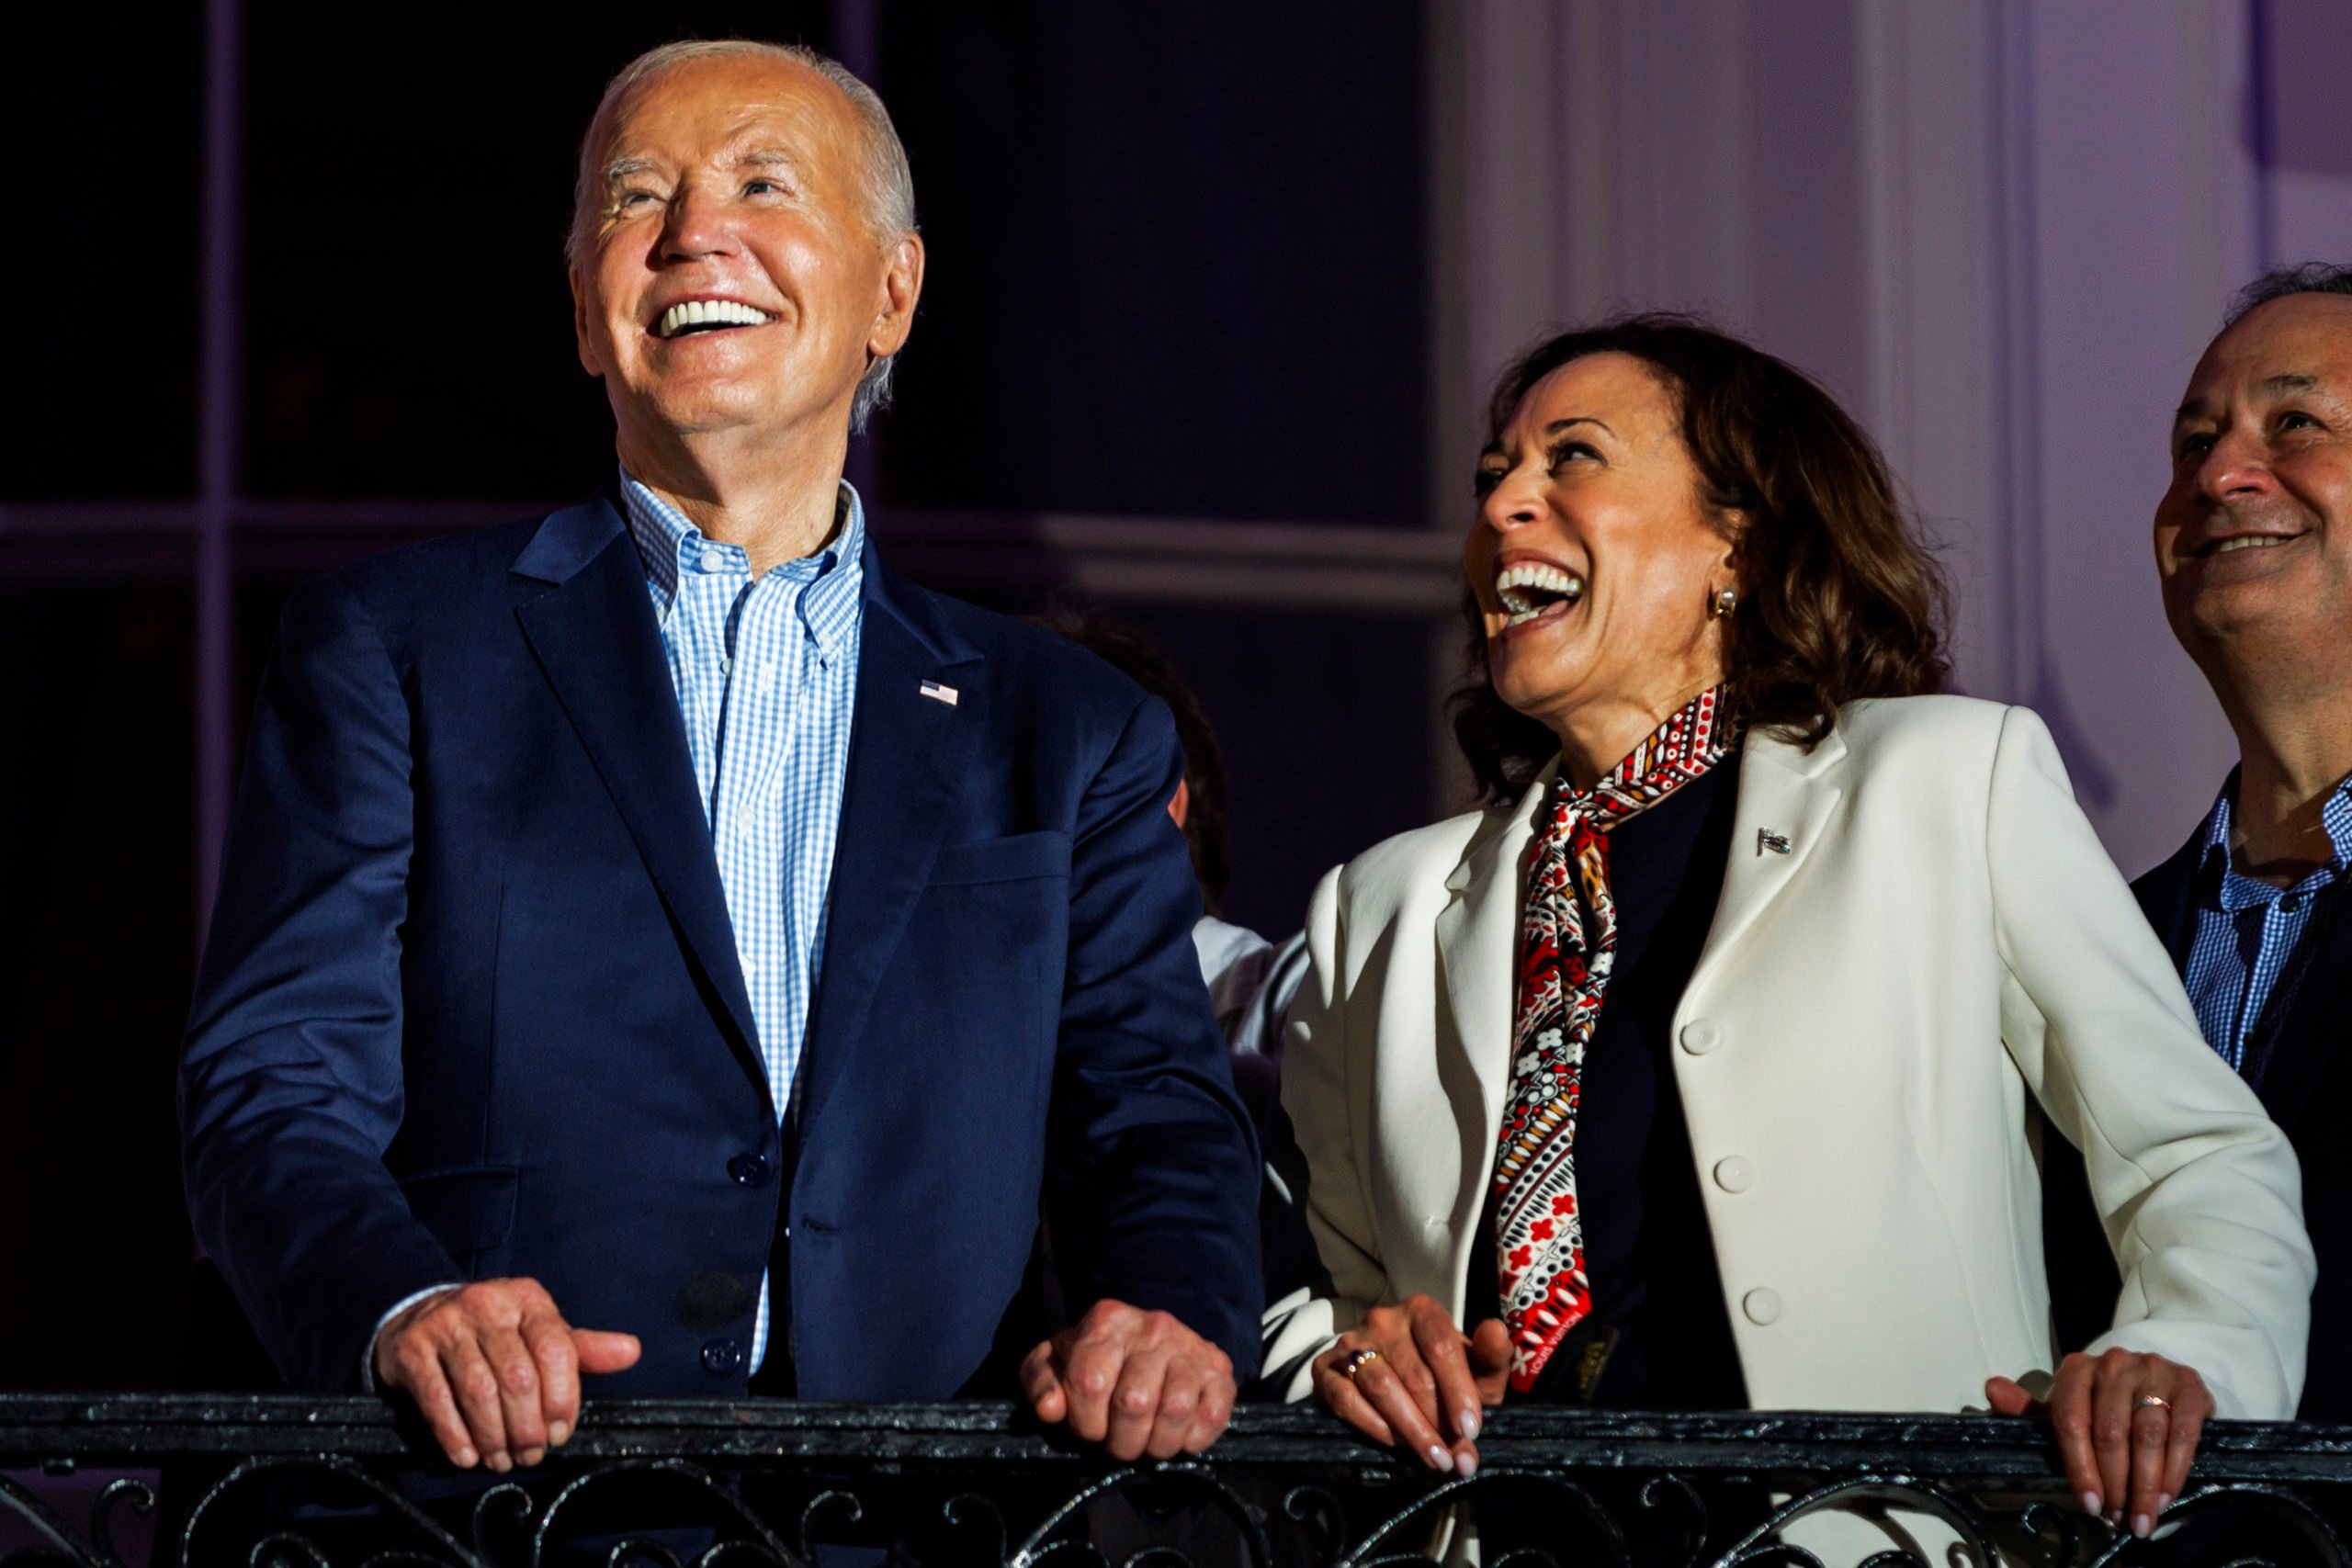 WASHINGTON, DC - JULY 04: President Joe Biden and Vice President Kamala Harris laugh as they view the fireworks on the National Mall from the White House balcony during a 4th of July event on the South Lawn of the White House on July 4, 2024 in Washington, DC. The President is hosting the Independence Day event for members of the military and their families. (Photo by Samuel Corum/Getty Images)